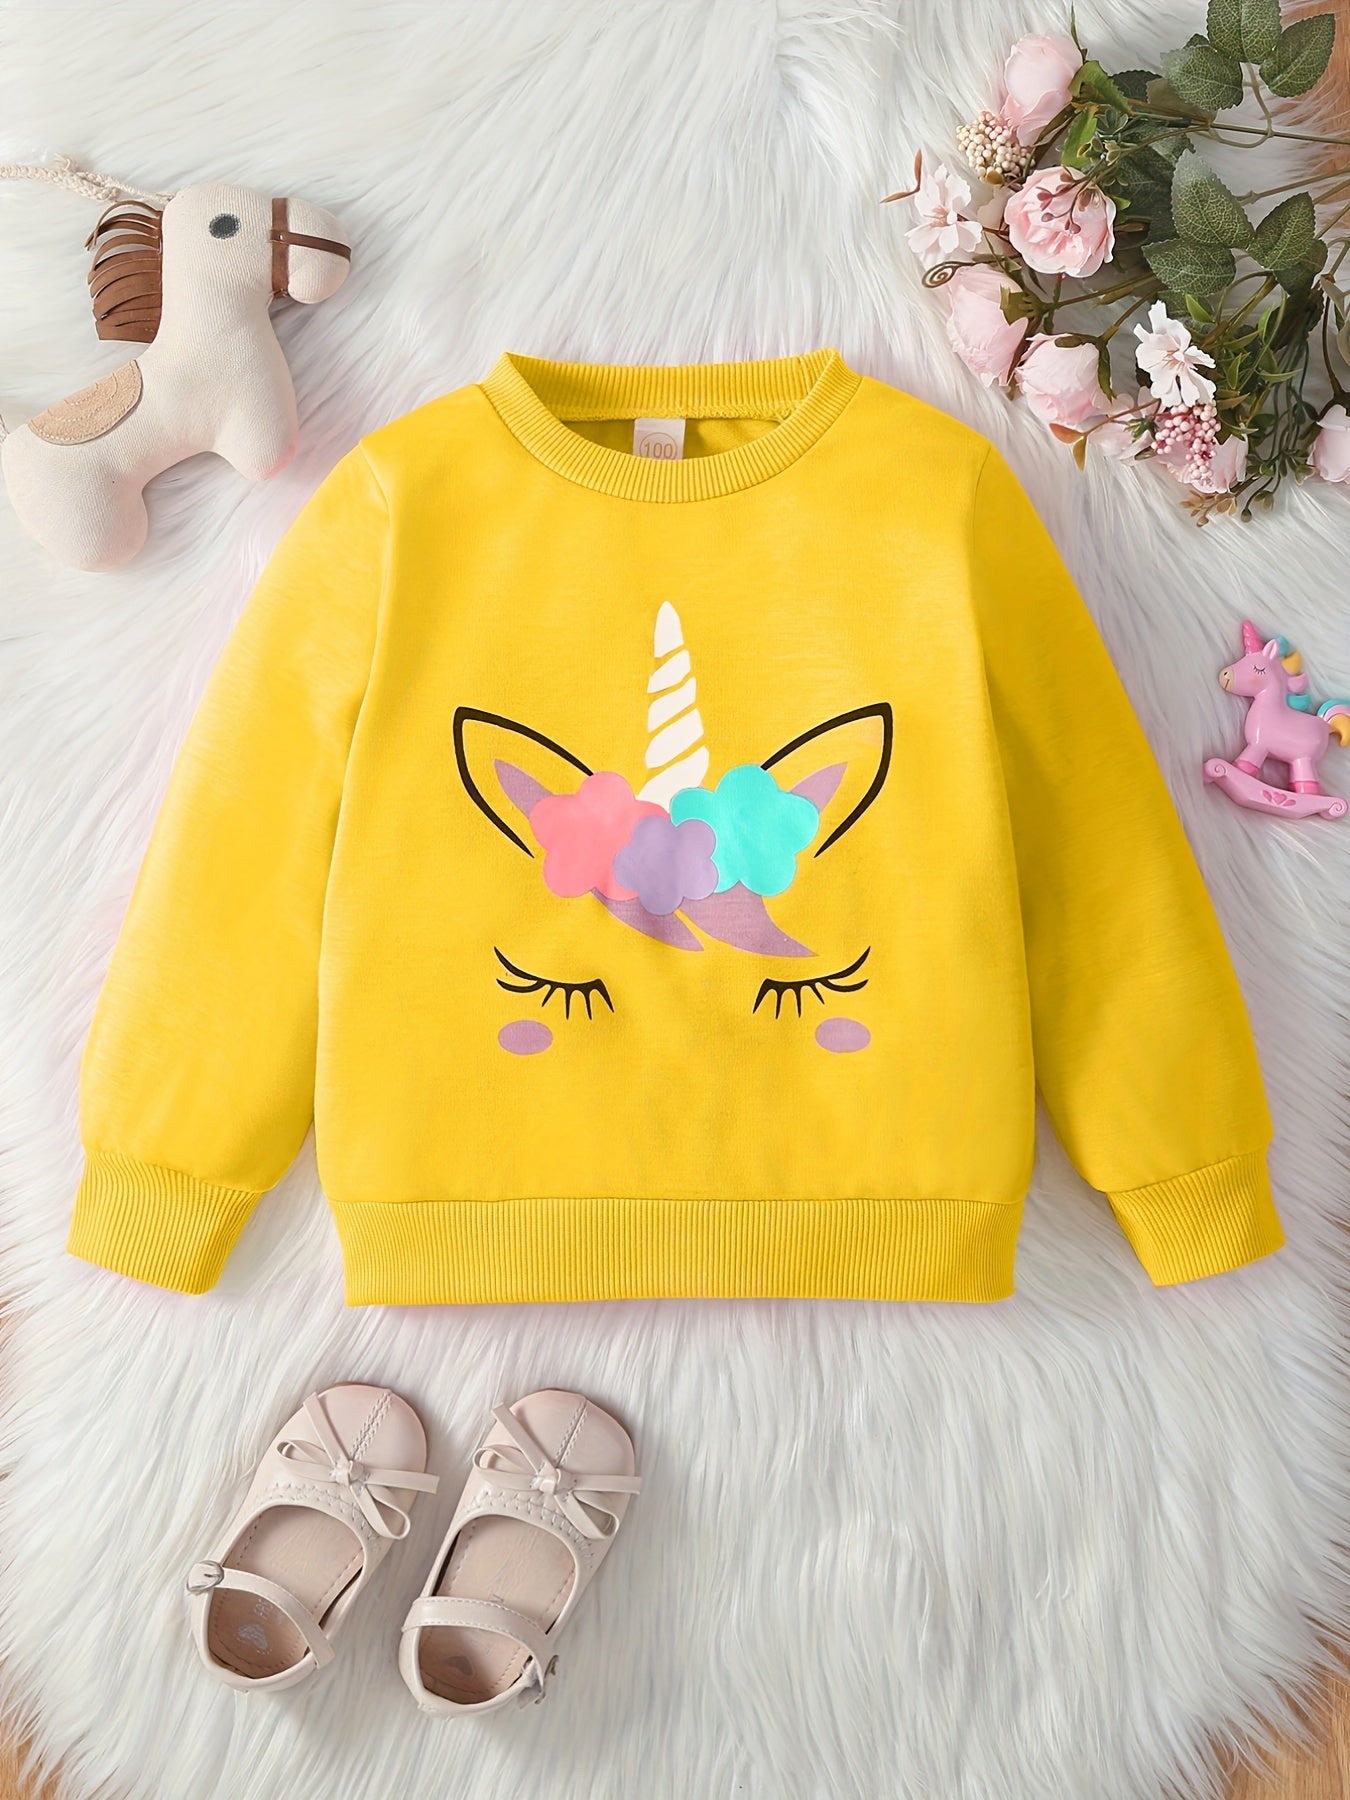 Kid's Cartoon Floral Pattern Sweatshirt, Casual Long Sleeve Top, Toddler Girl's Clothes For Spring Fall